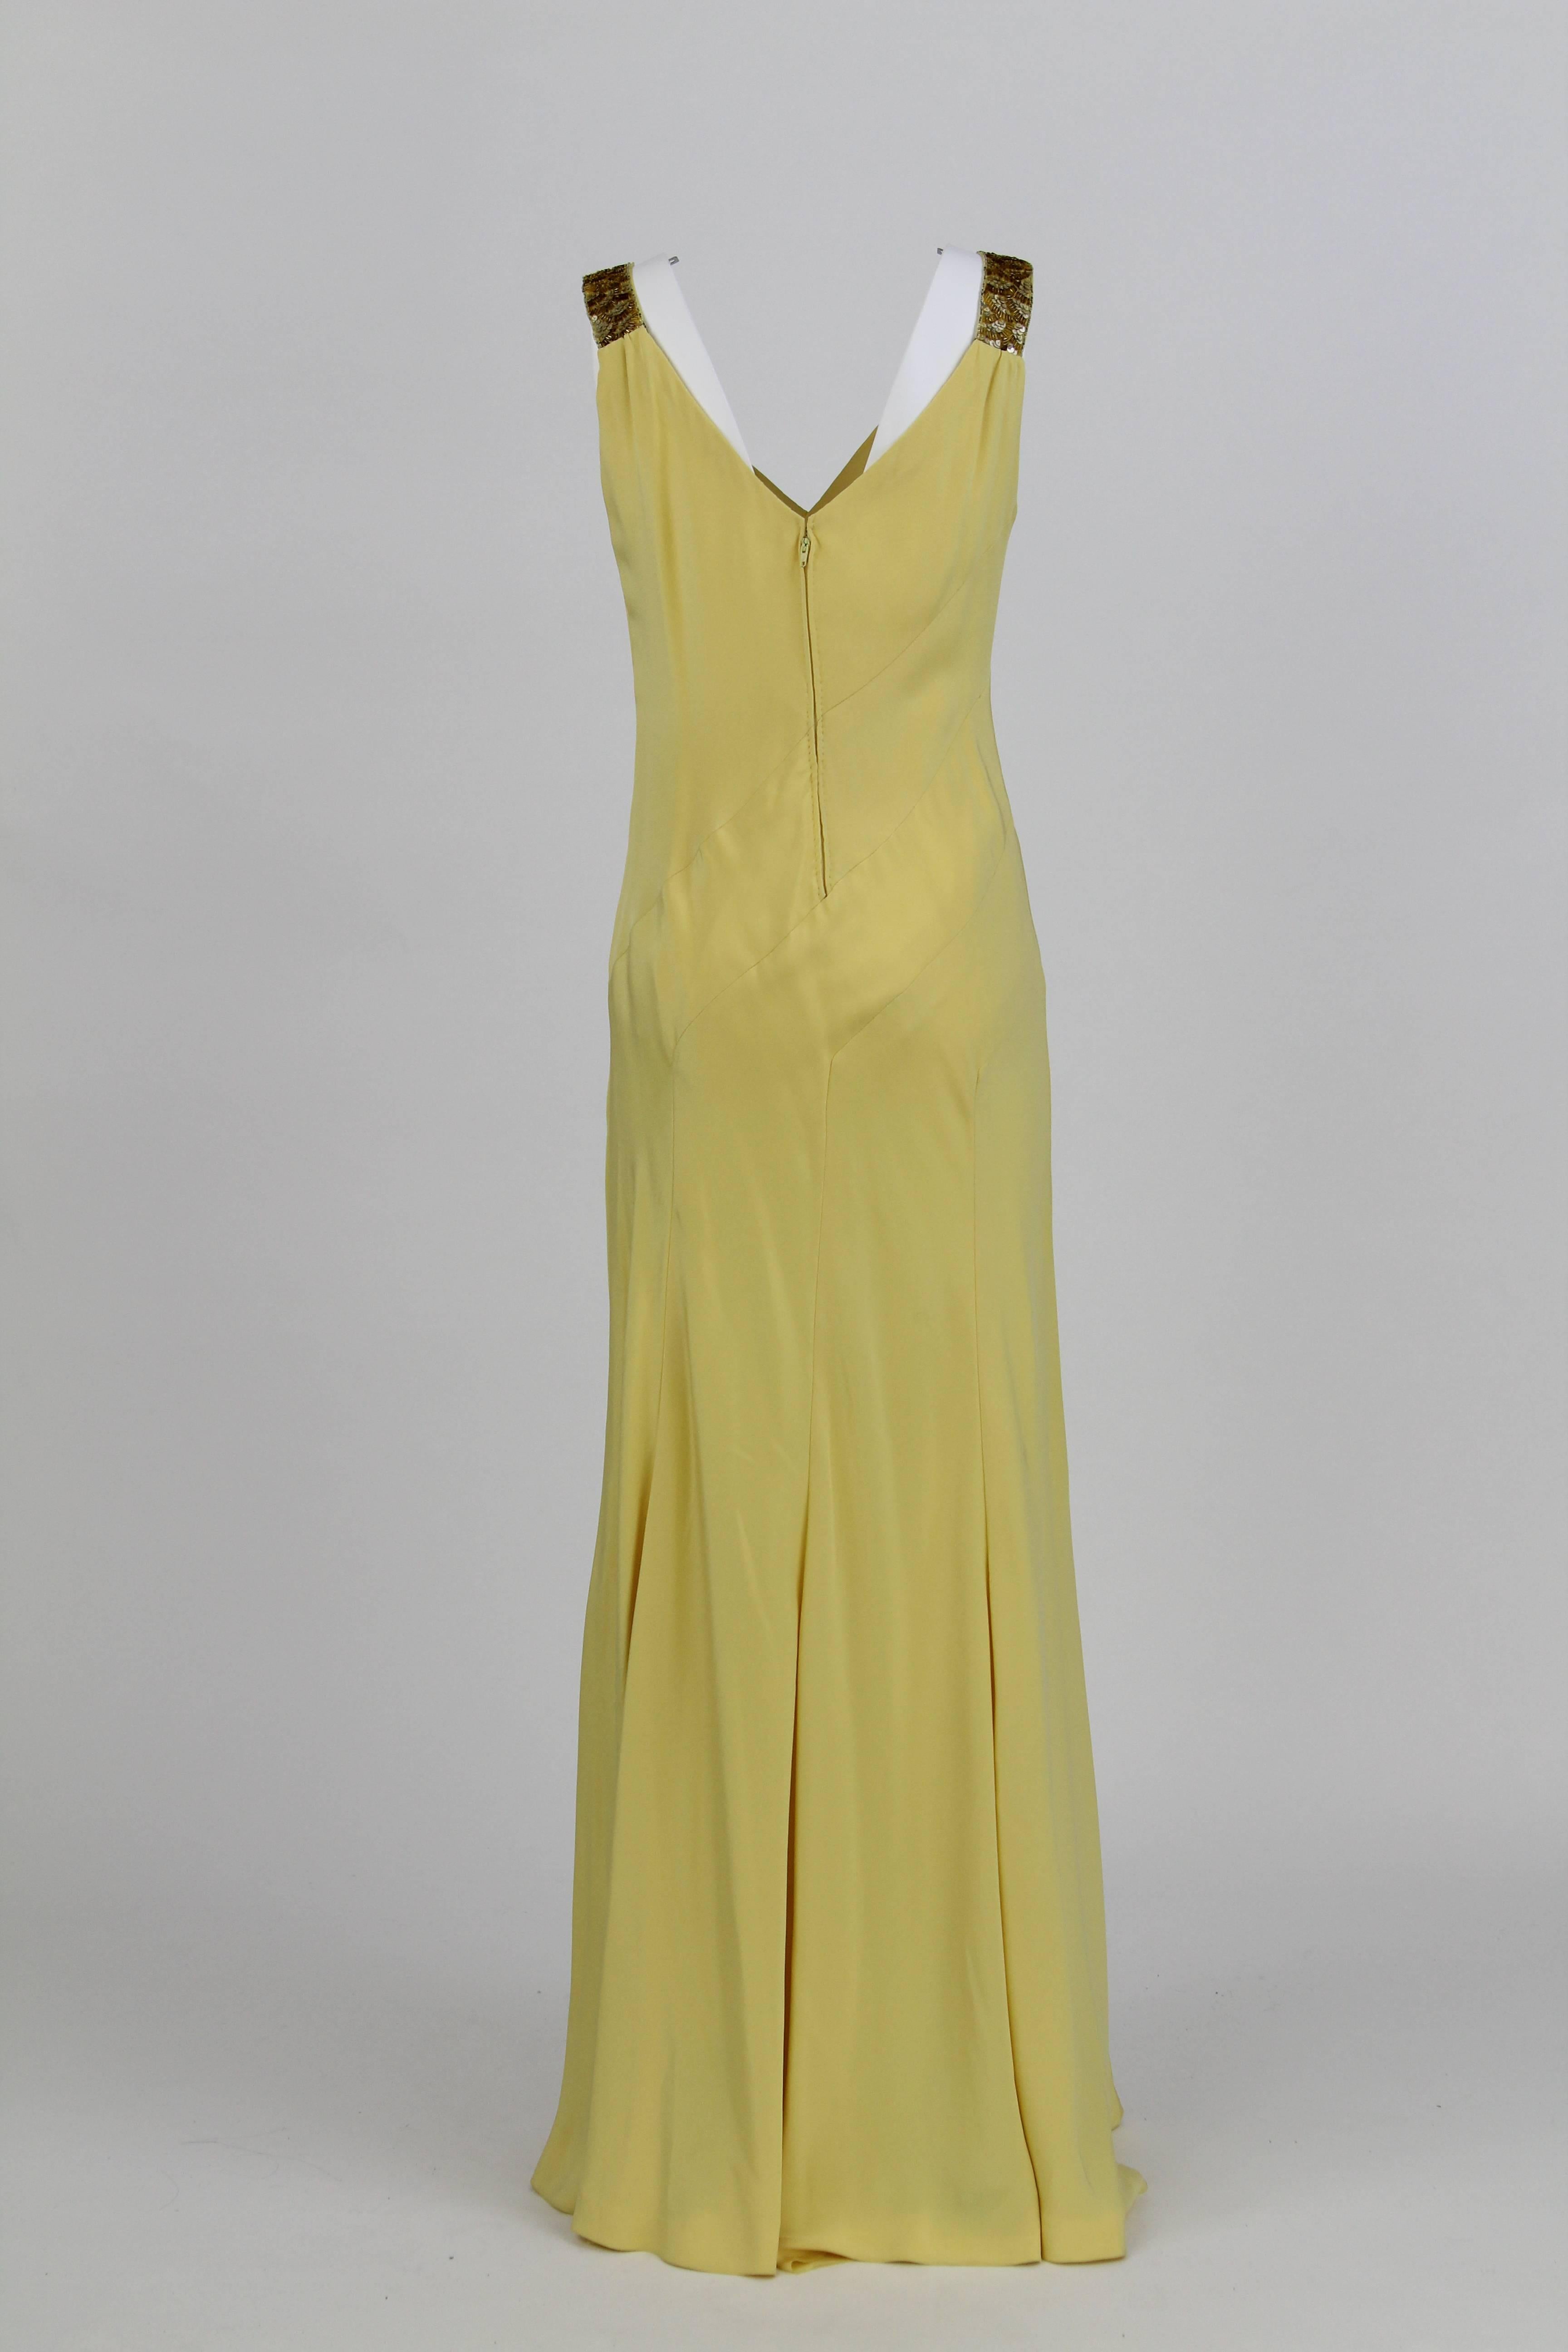 Flattering yellow dress handmade in Italy by the tailoring house Stop Sénès, featuring a V-neck, sequin embellished straps and a back zipper. 
In good conditions.
The dress is size 42. 
Considering the straps, the dress is 150 cm.